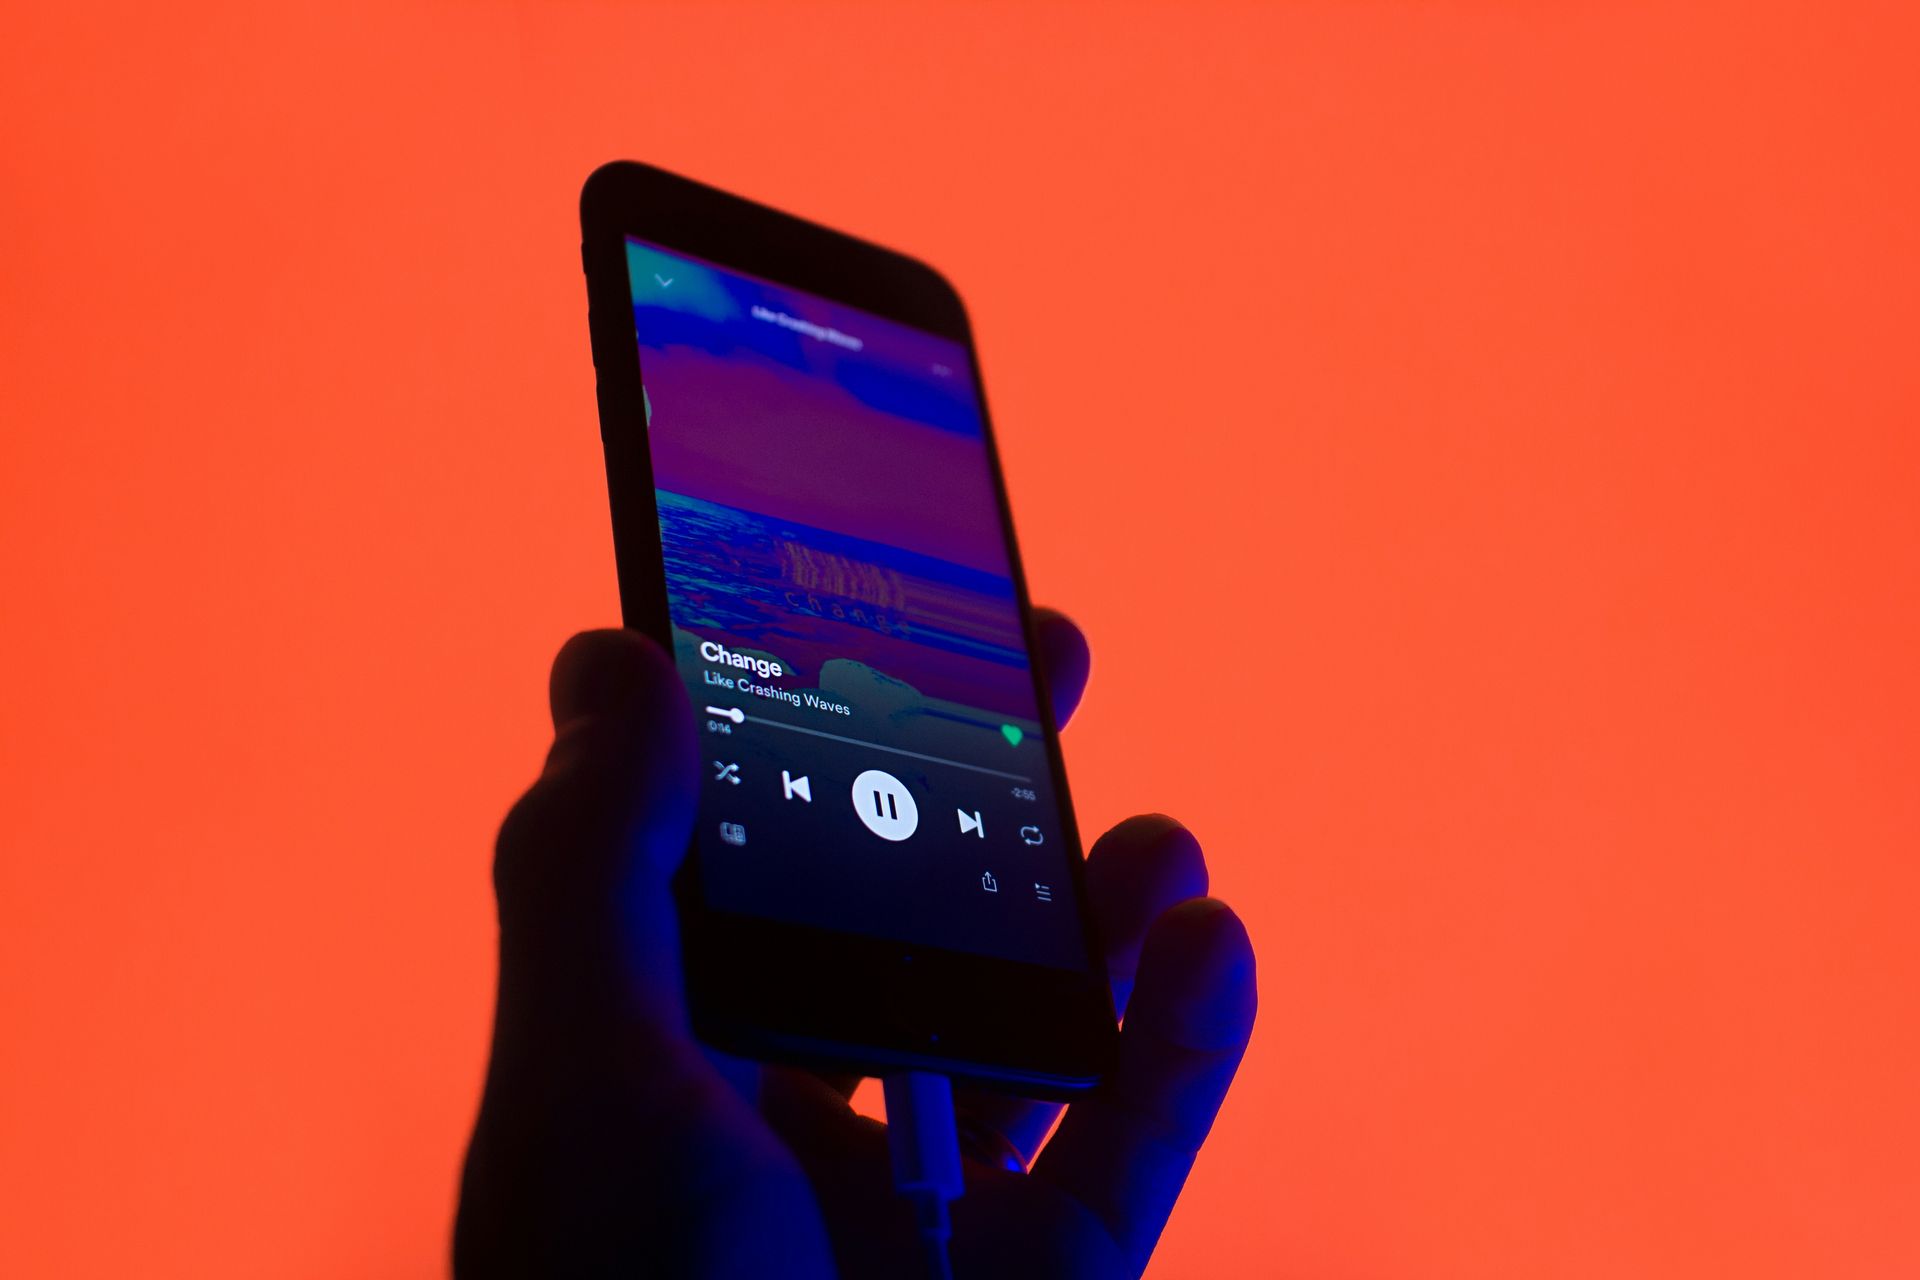 Spotify will offers in-app purchases in Europe